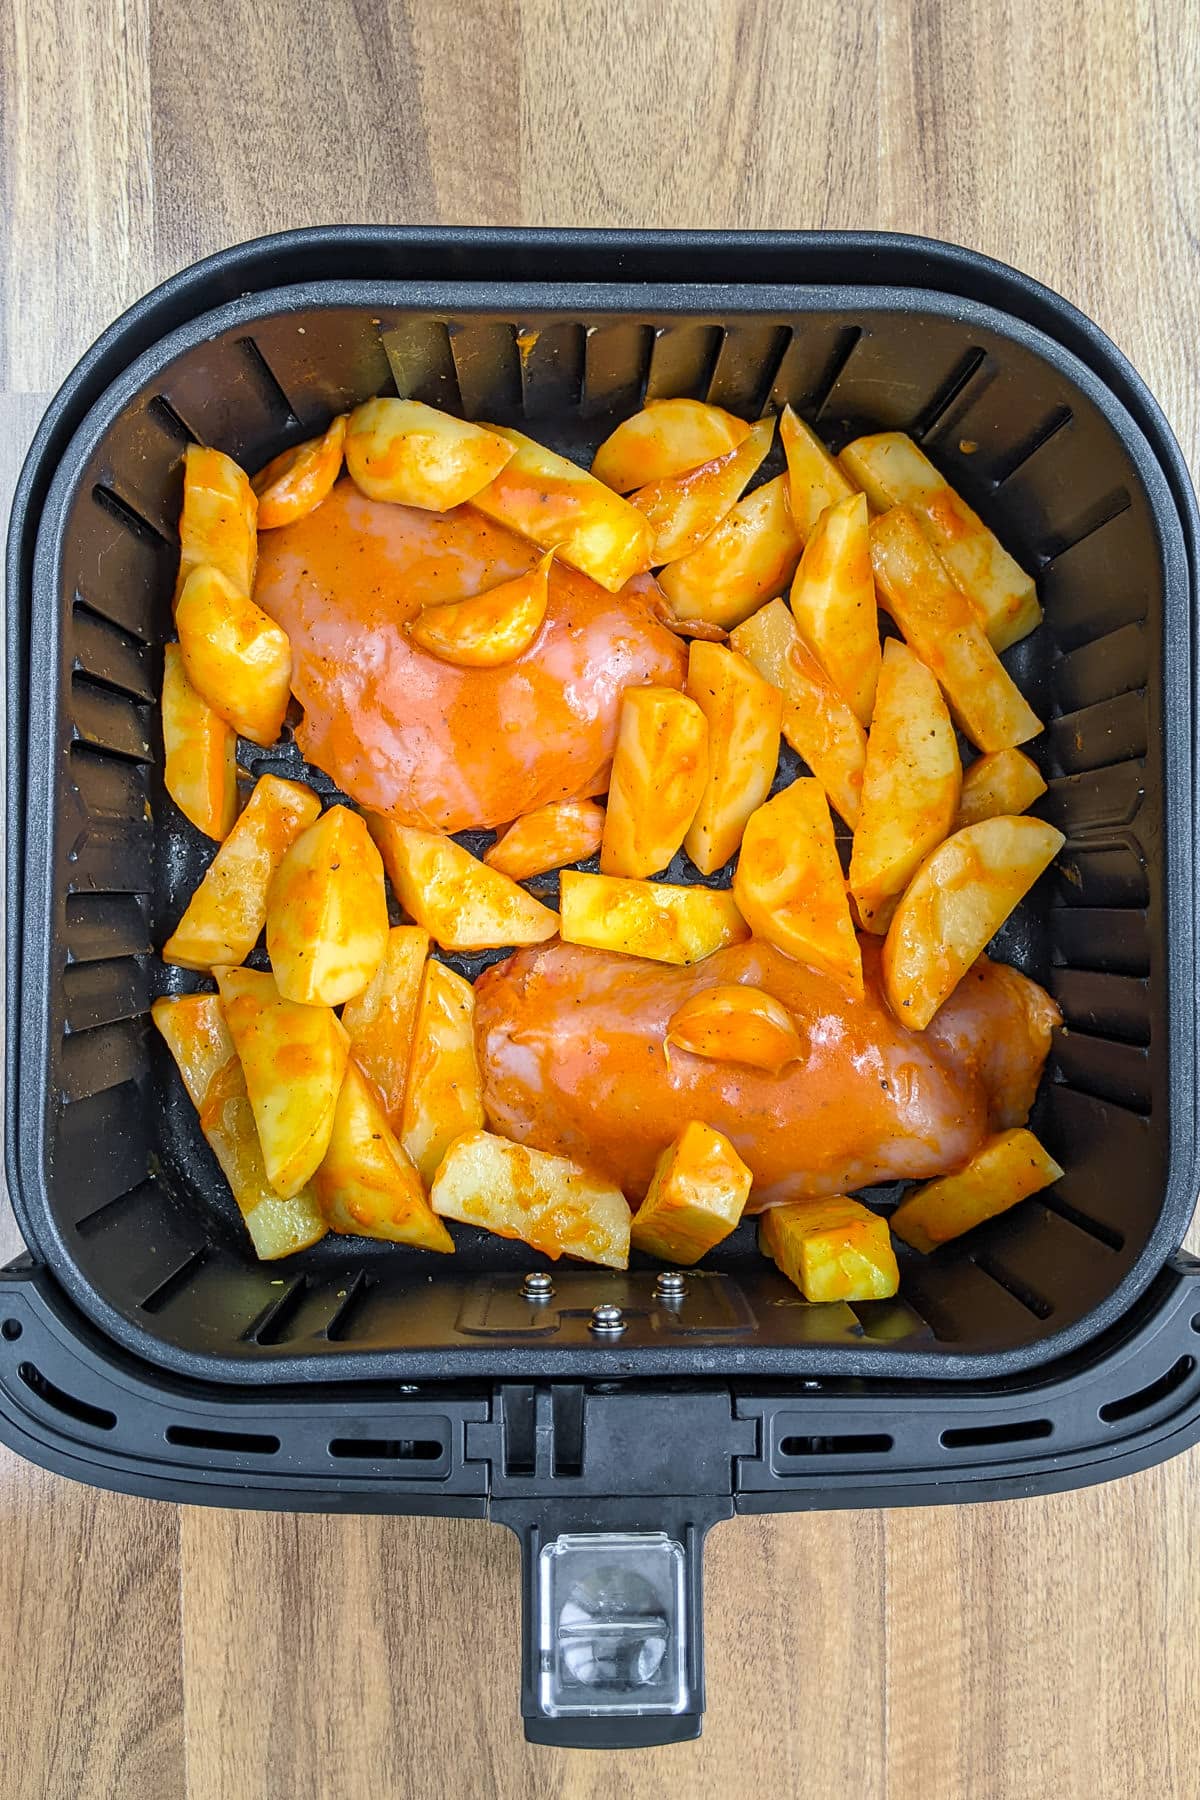 Chicken breasts and potatoes in air fryer marinated in buffalo sauce.